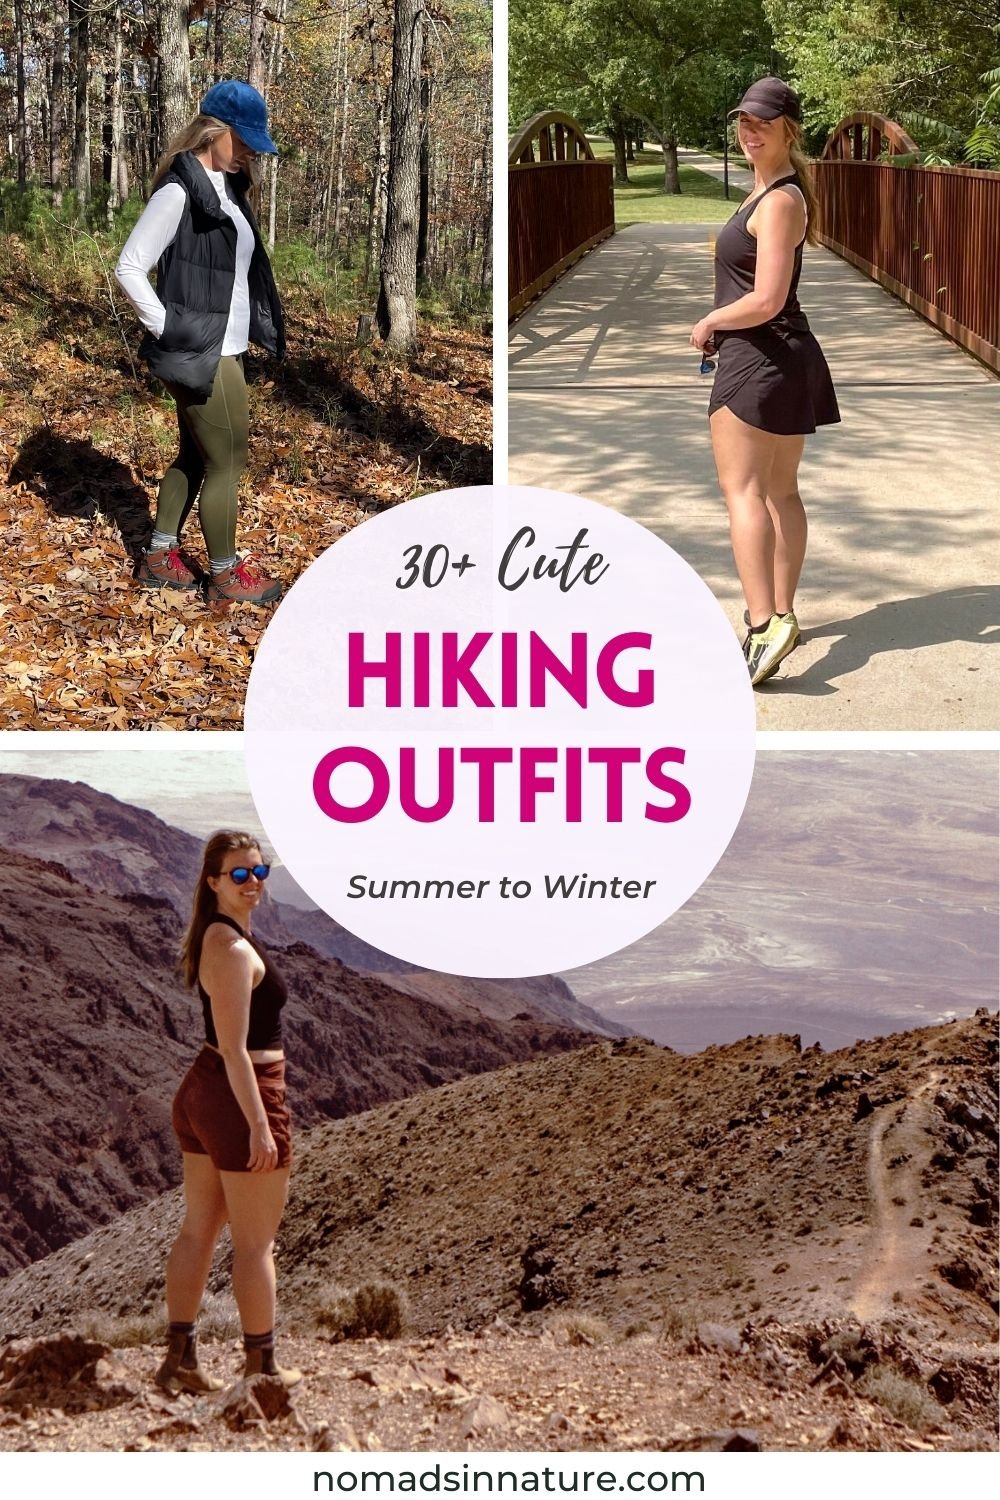 What to Wear for Hiking In Summer